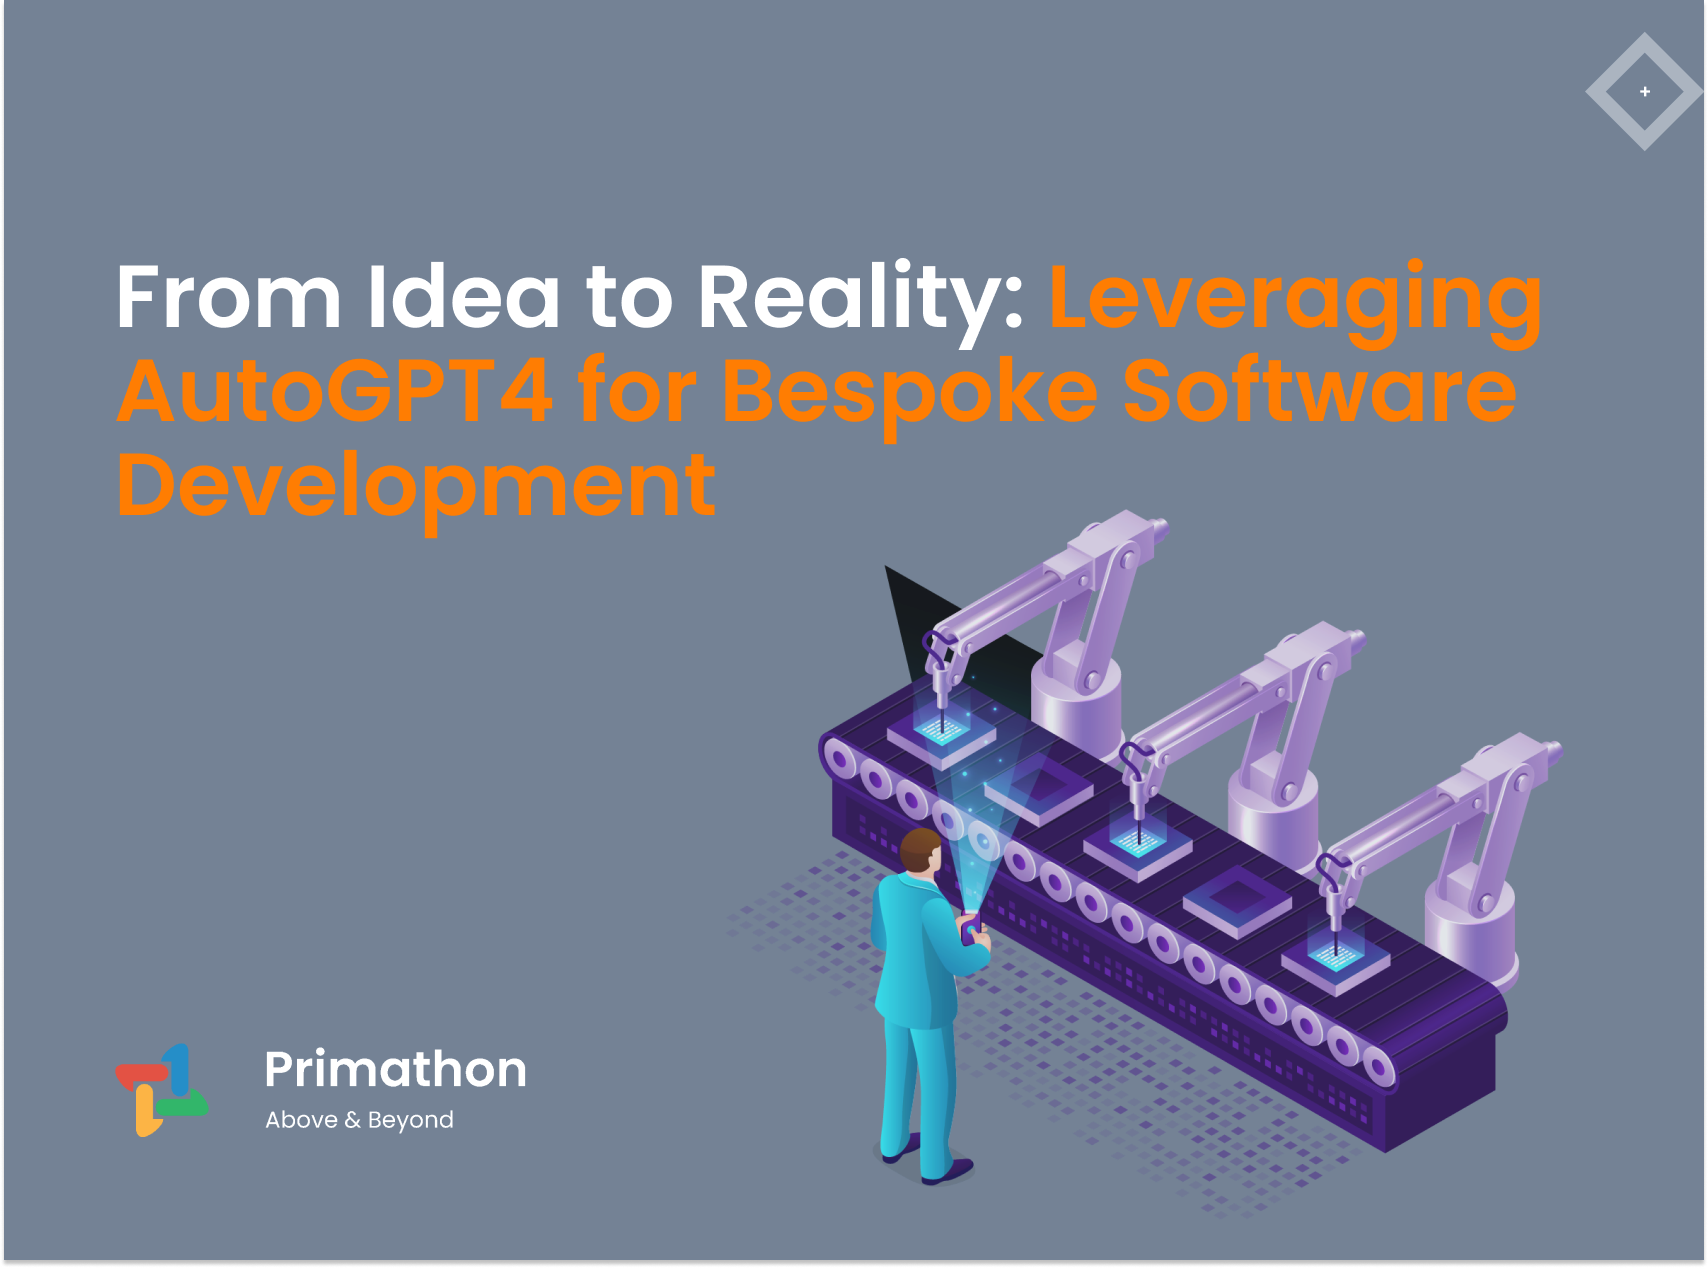 From Idea to Reality: Leveraging AutoGPT4 for Bespoke Software Development